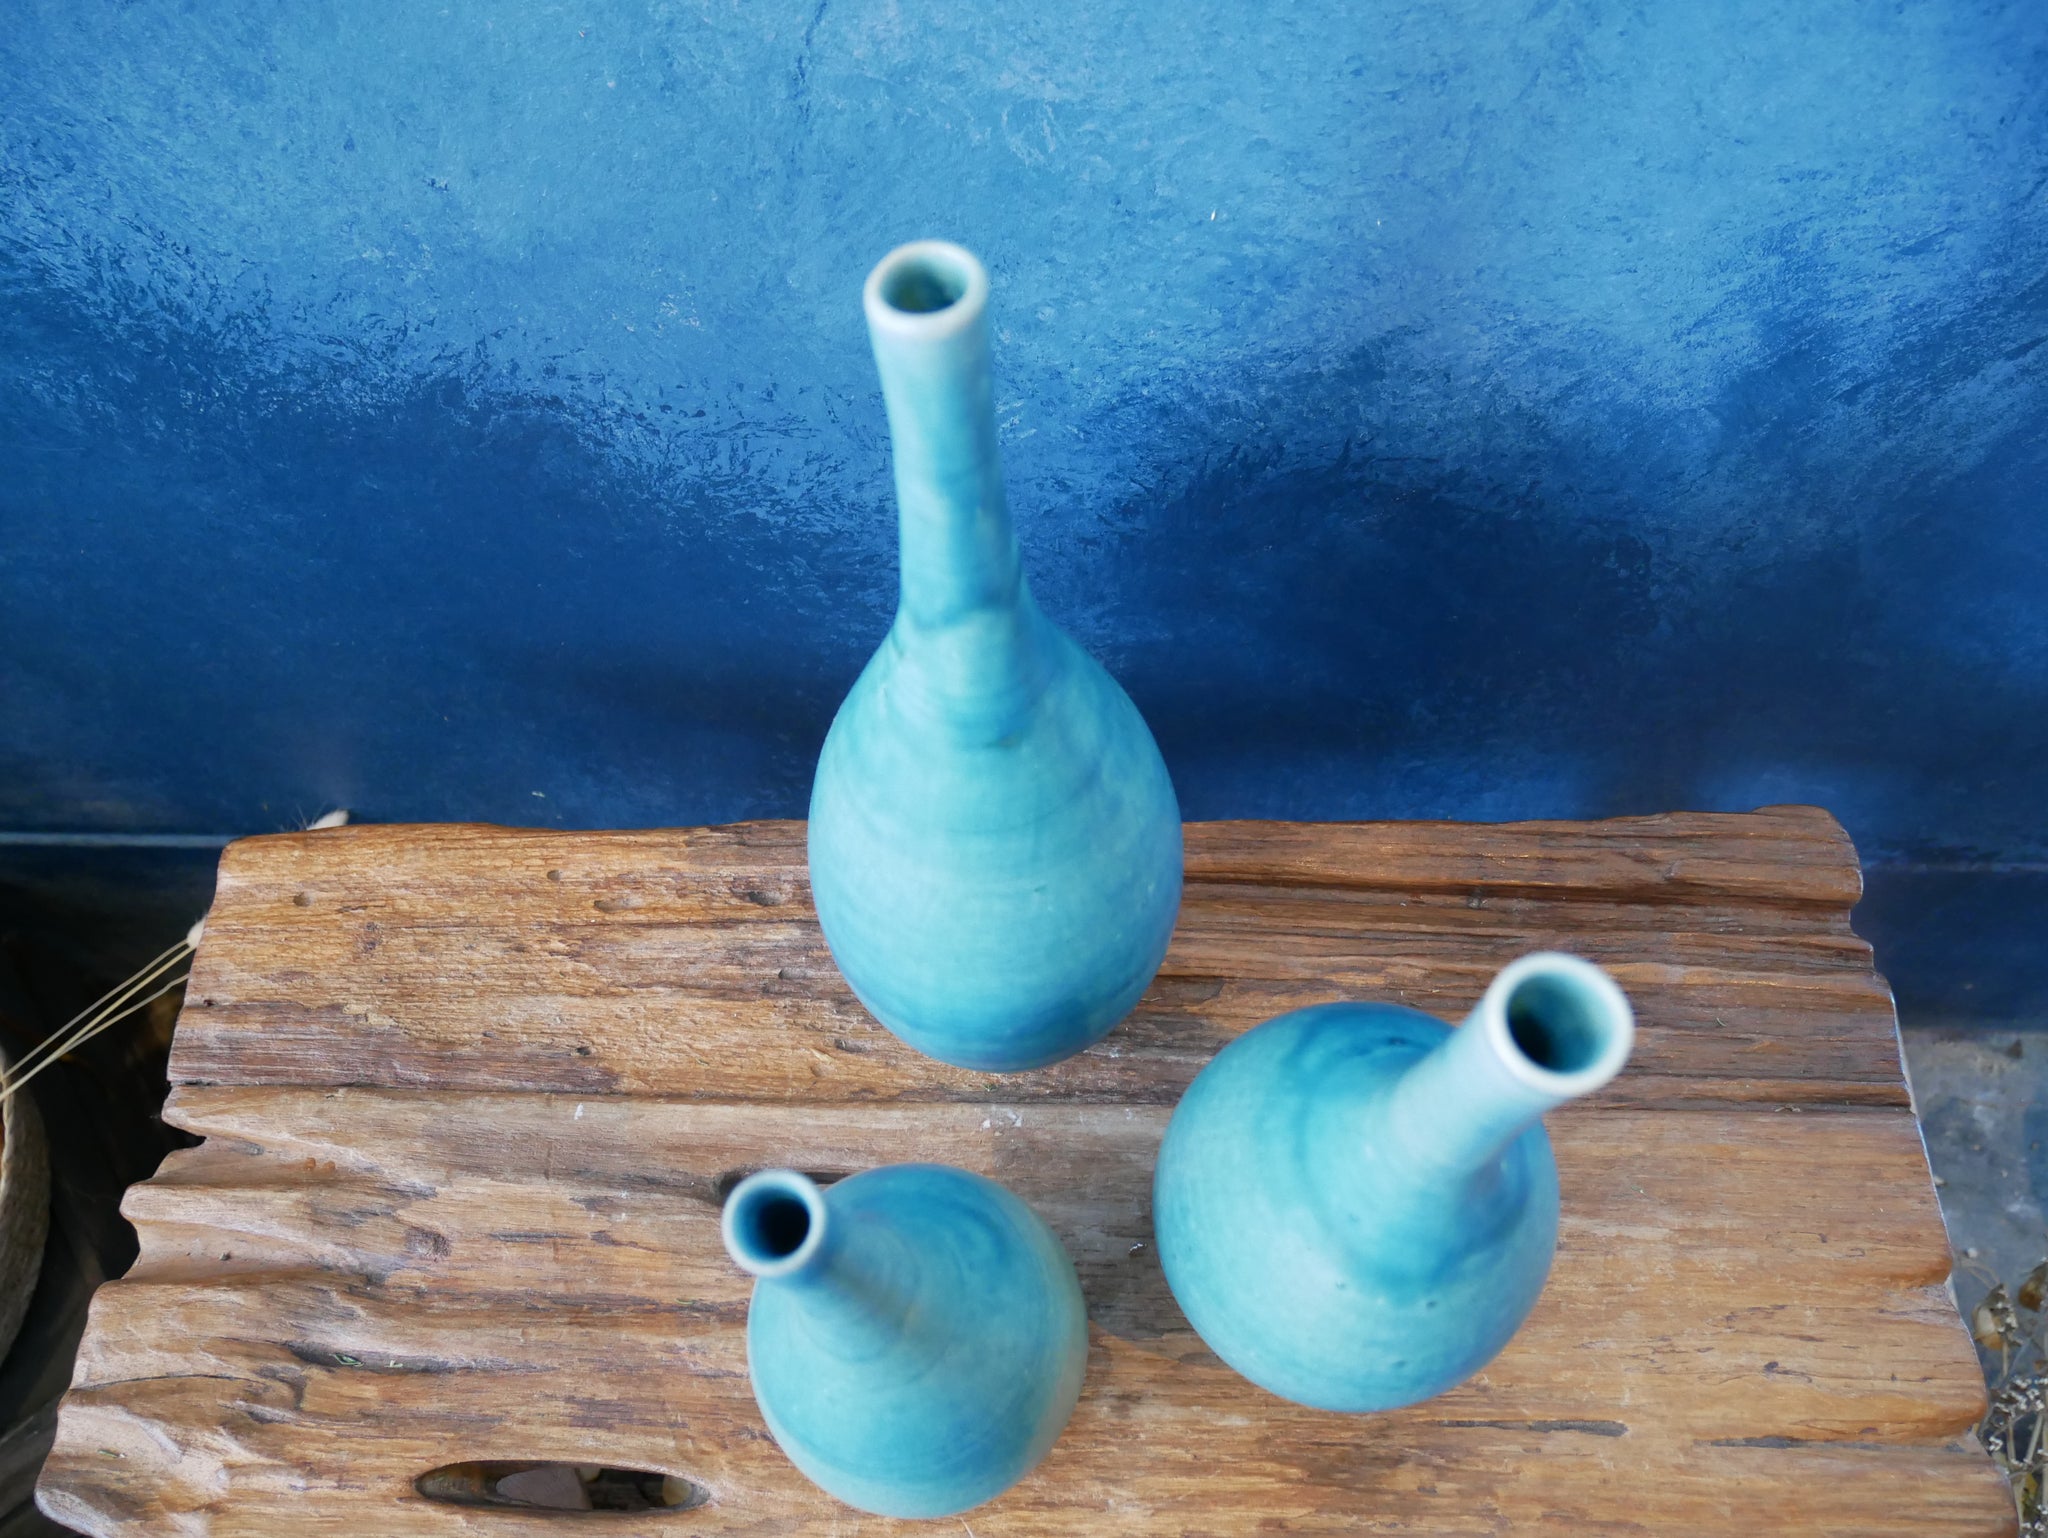 Turquoise Sky Set of 3 Vases